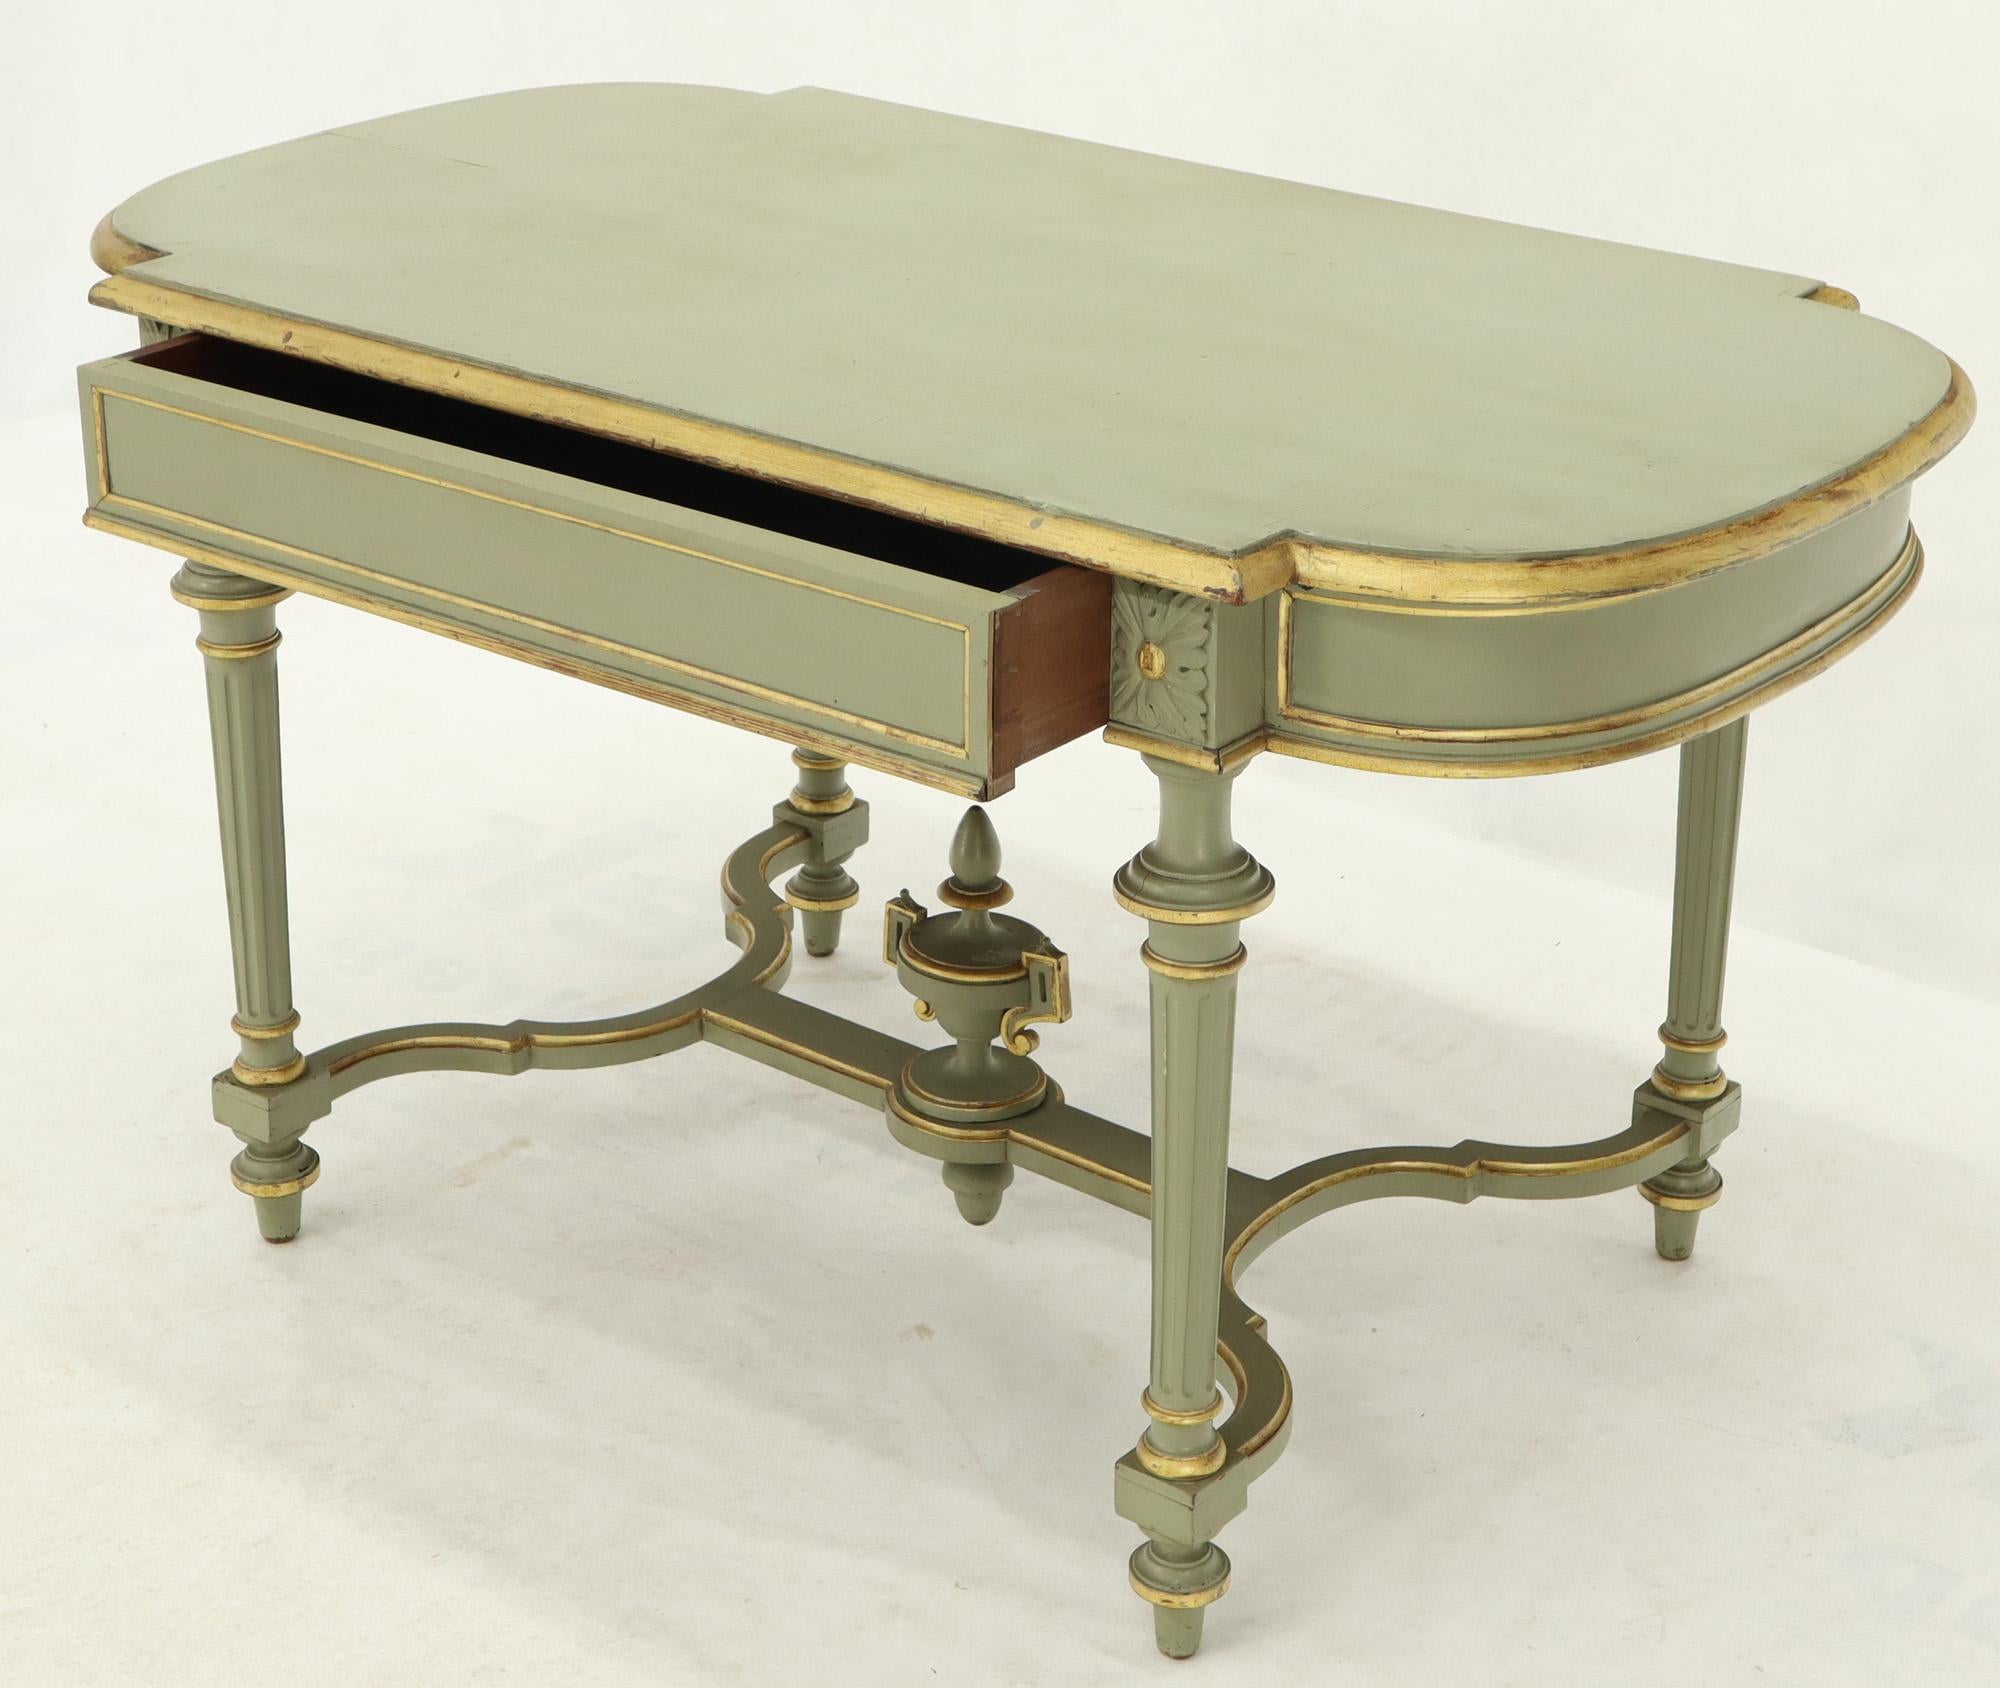 Shabby Chic and Gold Leaf Distressed Antique Writing Table Desk Large Console For Sale 4